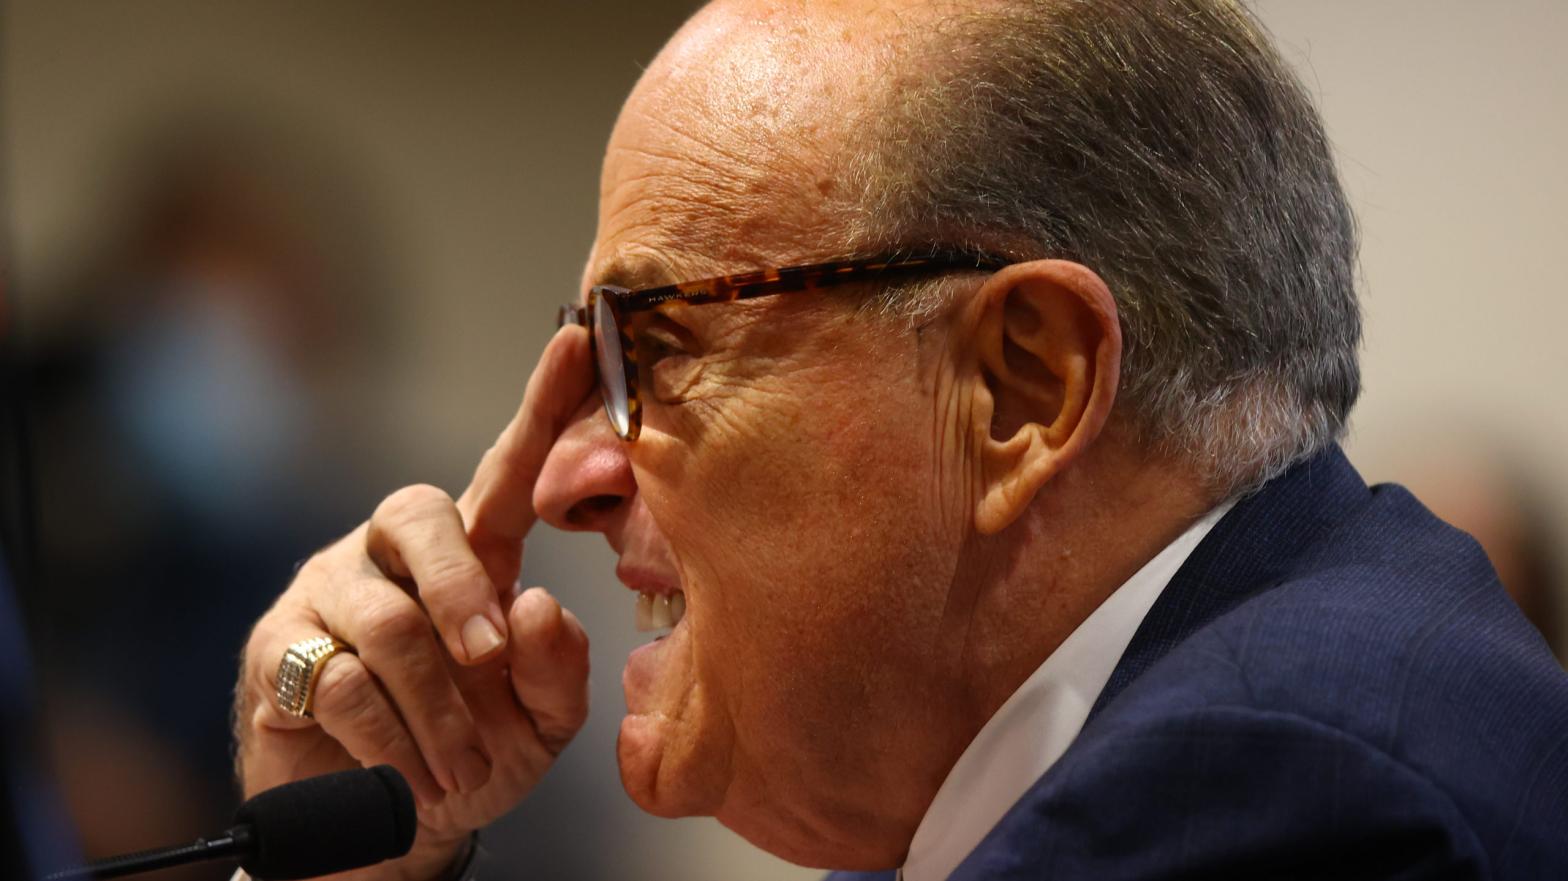 U.S. President Donald Trump's personal attorney Rudy Giuliani speaks during an appearance before the Michigan House Oversight Committee on December 2, 2020 in Lansing, Michigan.  (Photo: Rey Del Rio, Getty Images)